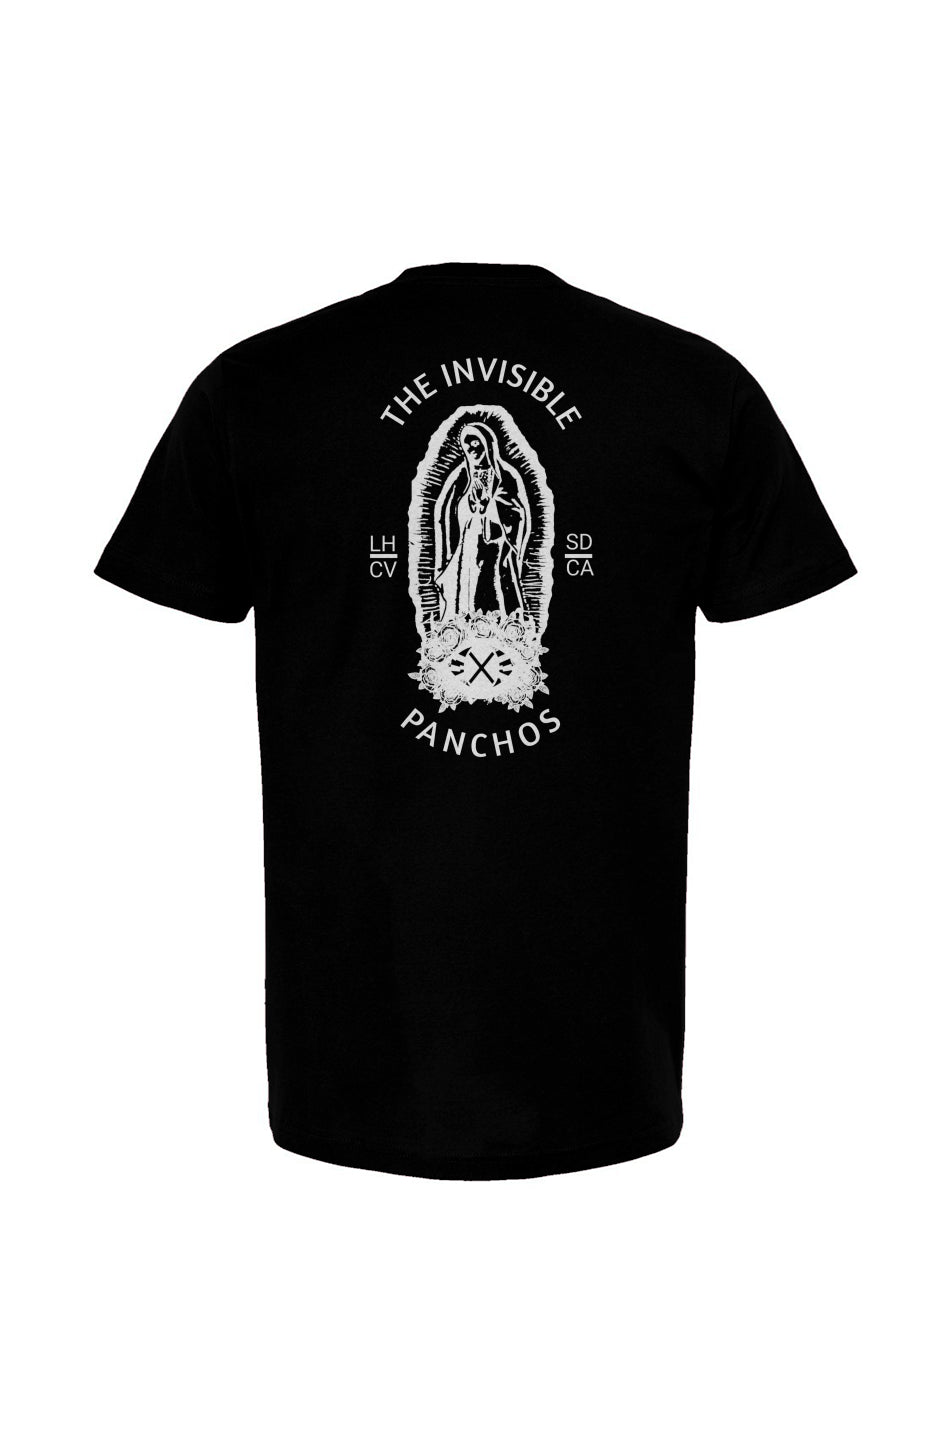 The Invisible Panchos Mother T- White/ Black